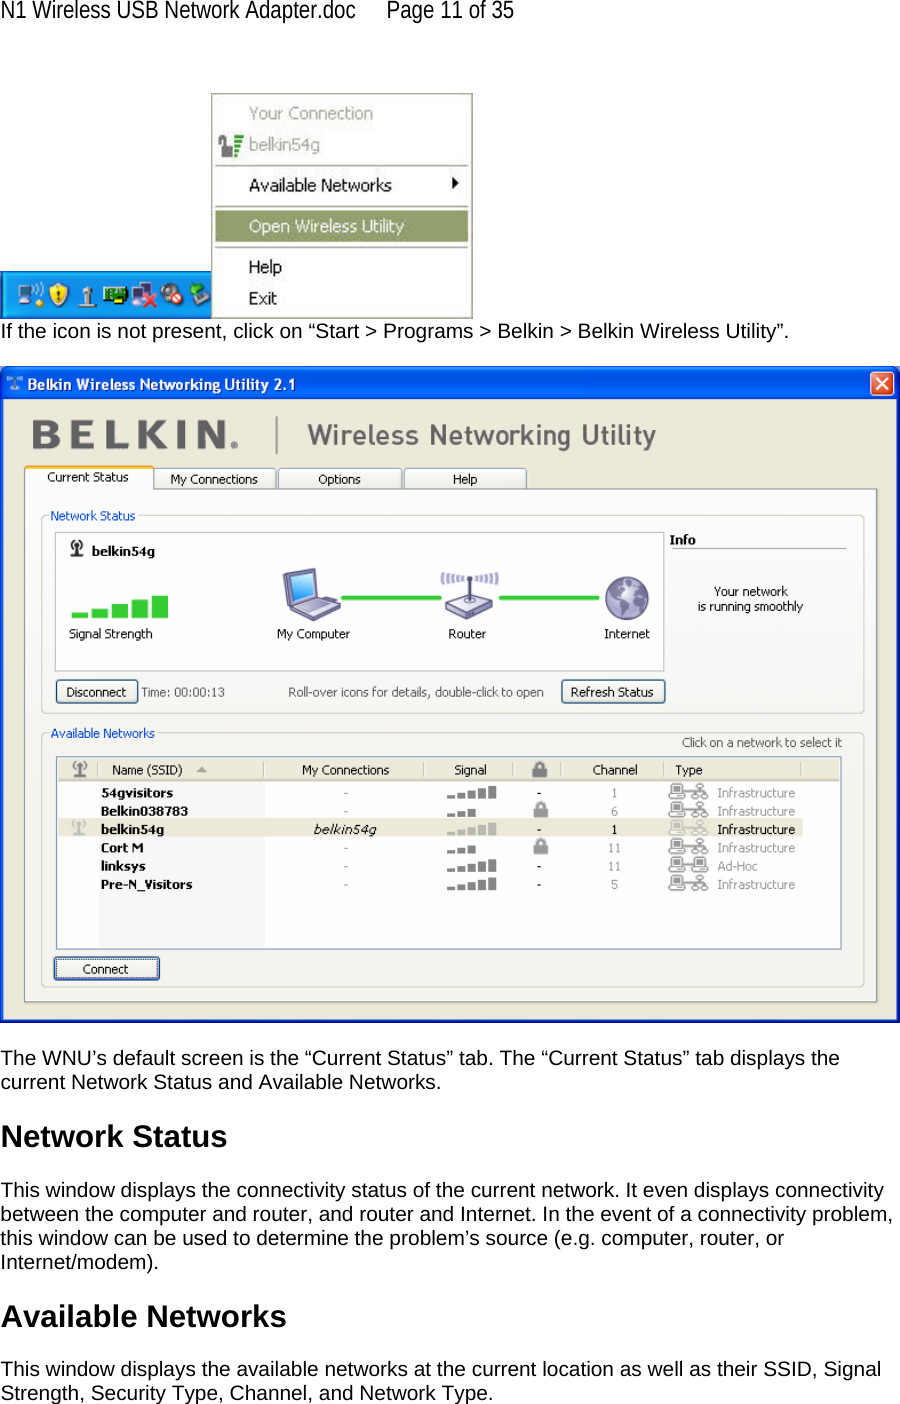 N1 Wireless USB Network Adapter.doc  Page 11 of 35   If the icon is not present, click on “Start &gt; Programs &gt; Belkin &gt; Belkin Wireless Utility”.    The WNU’s default screen is the “Current Status” tab. The “Current Status” tab displays the current Network Status and Available Networks.  Network Status  This window displays the connectivity status of the current network. It even displays connectivity between the computer and router, and router and Internet. In the event of a connectivity problem, this window can be used to determine the problem’s source (e.g. computer, router, or Internet/modem).  Available Networks  This window displays the available networks at the current location as well as their SSID, Signal Strength, Security Type, Channel, and Network Type. 